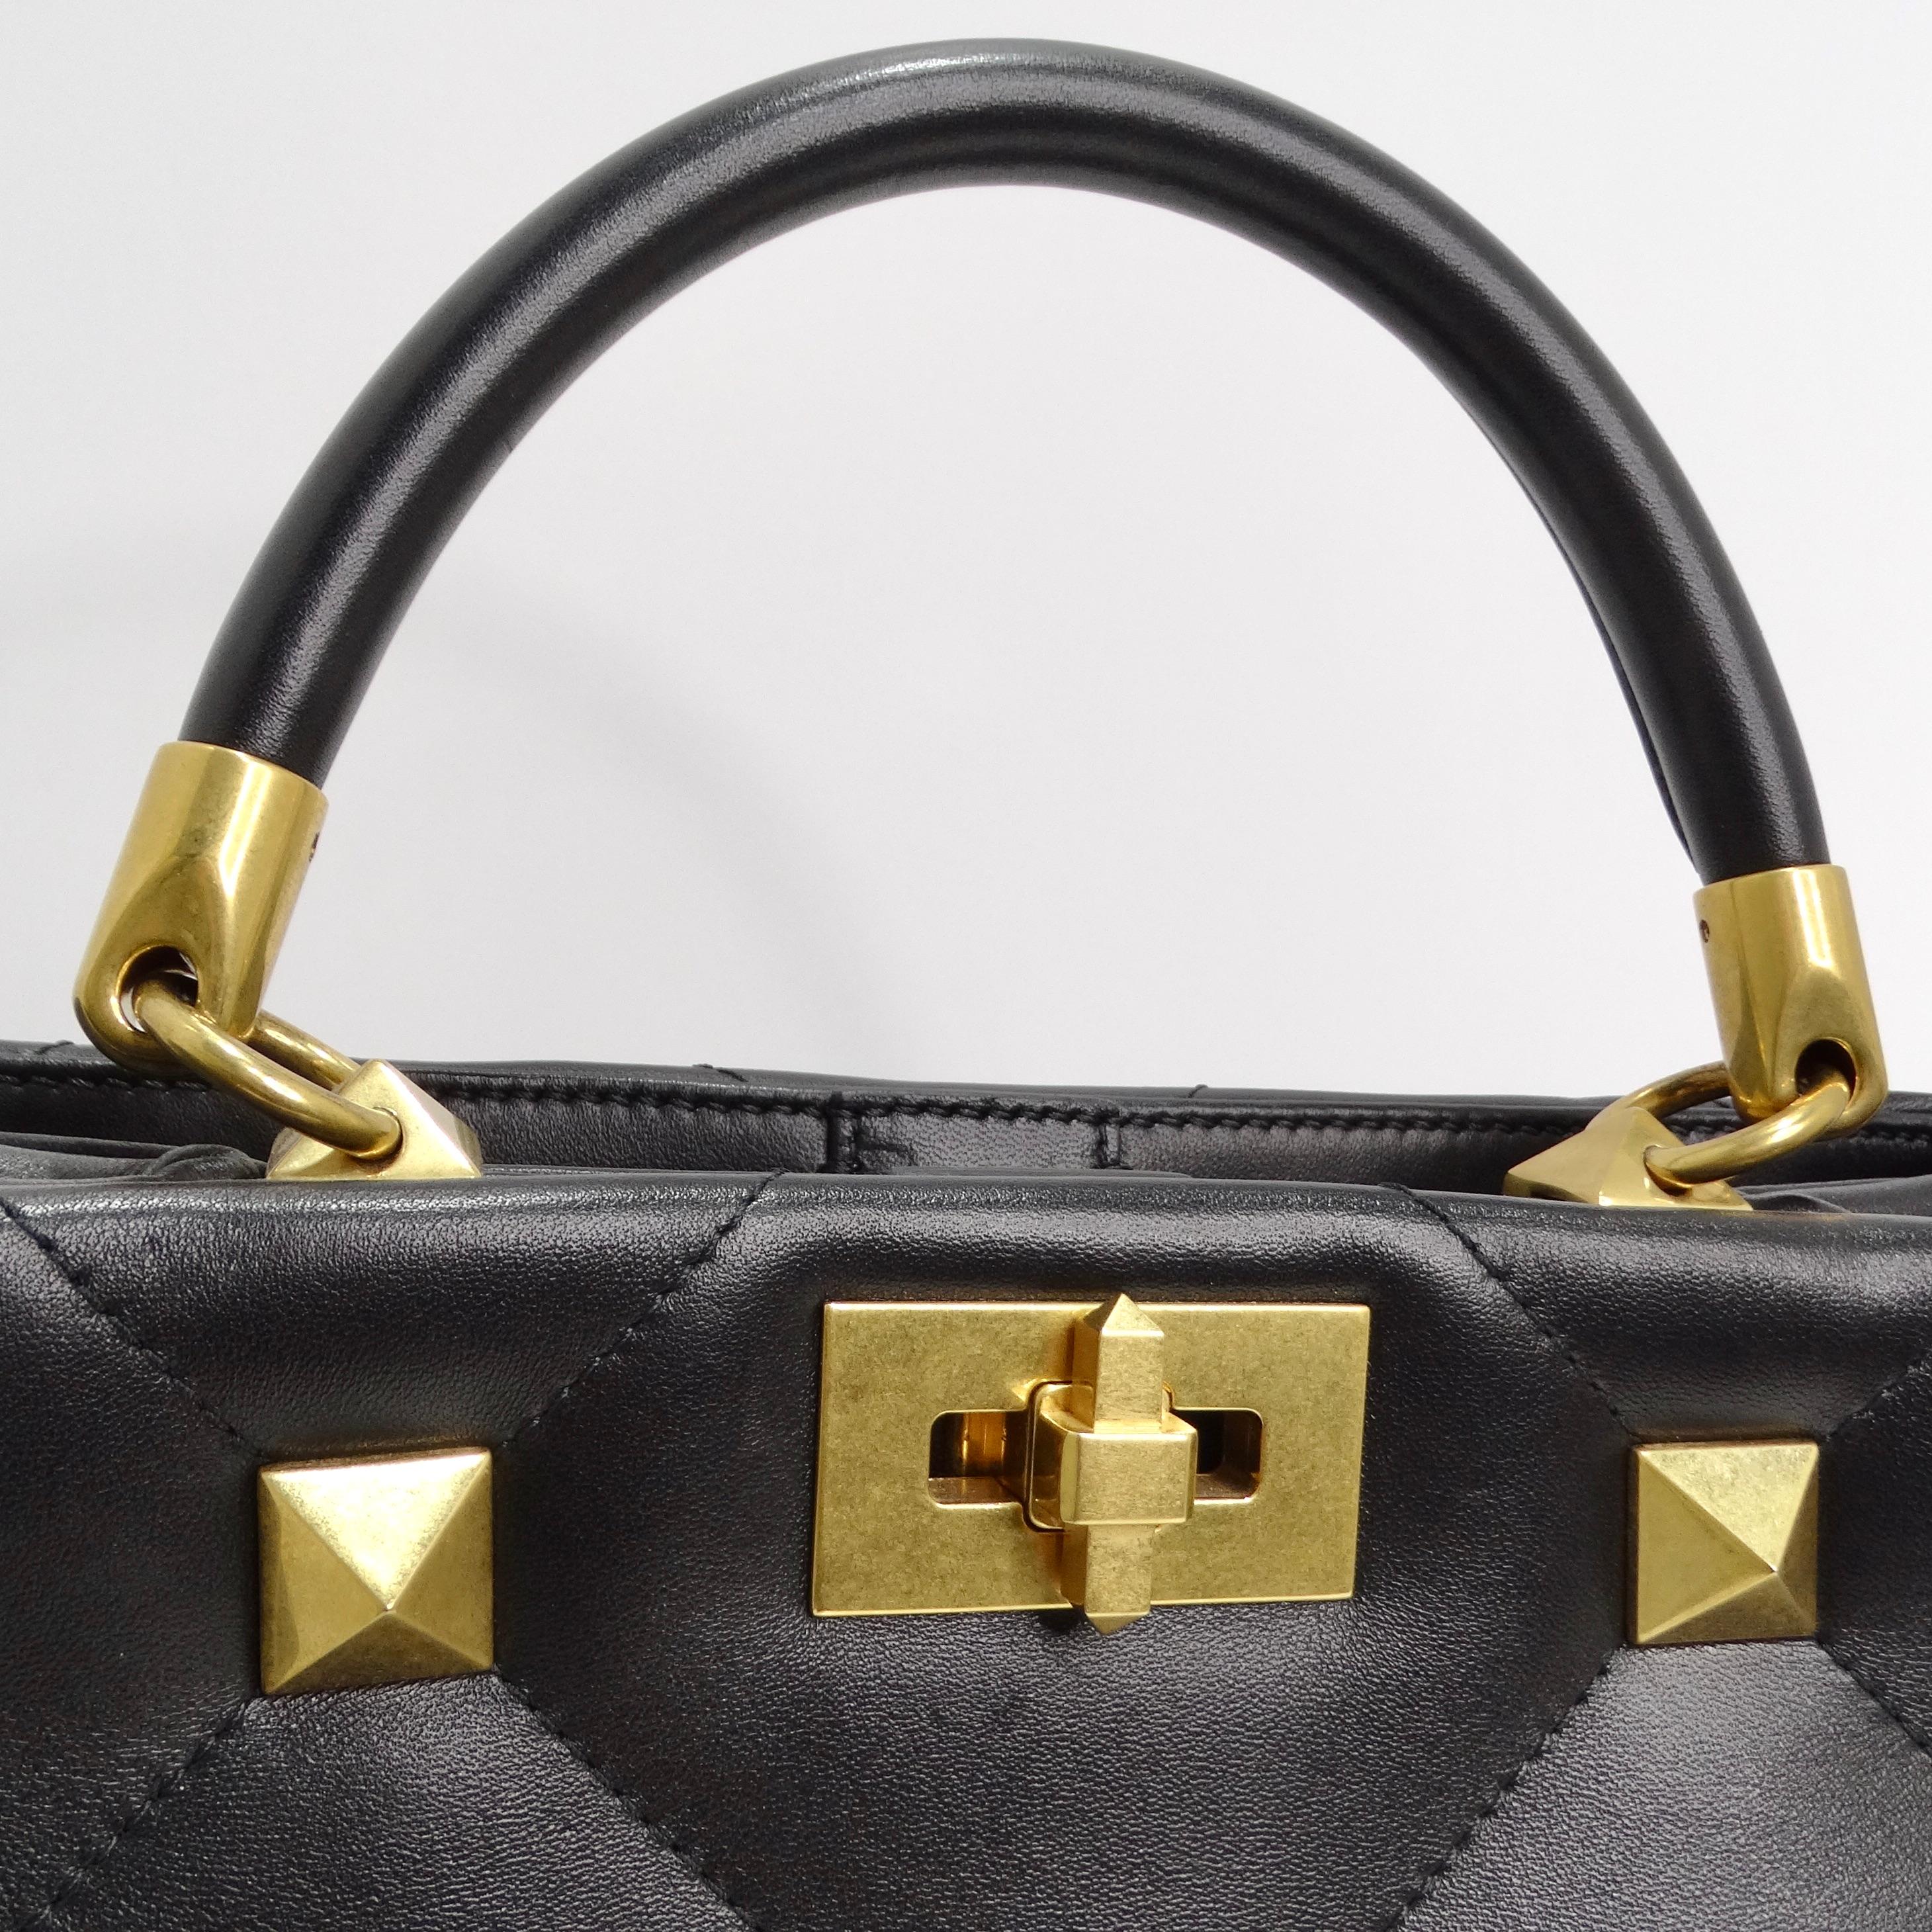 The Valentino Garavani Roman Stud Nappa Bag is a luxurious and versatile accessory that seamlessly blends sophistication with edgy detailing. Crafted from quilted black leather, the bag features an eye-catching rhombus pattern enhanced by